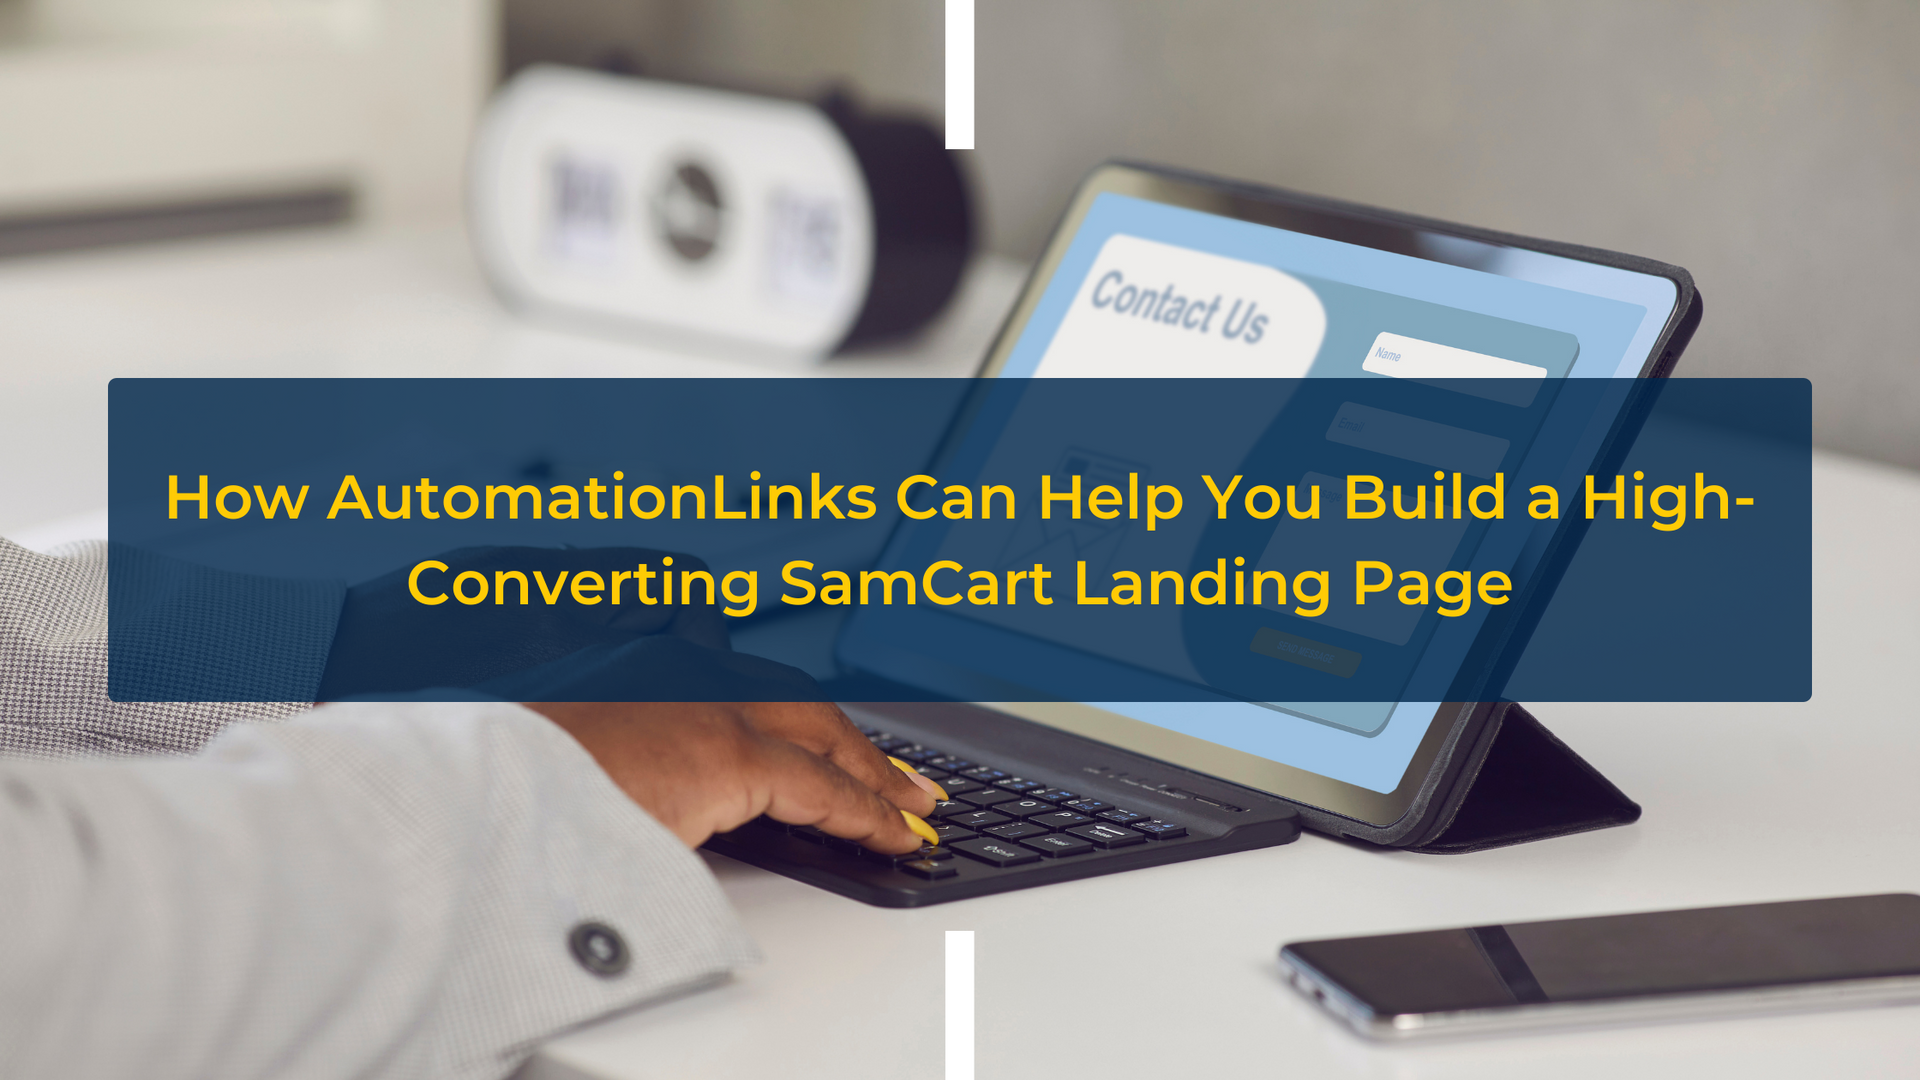 How AutomationLinks Can Help You Build a High-Converting SamCart Landing Page